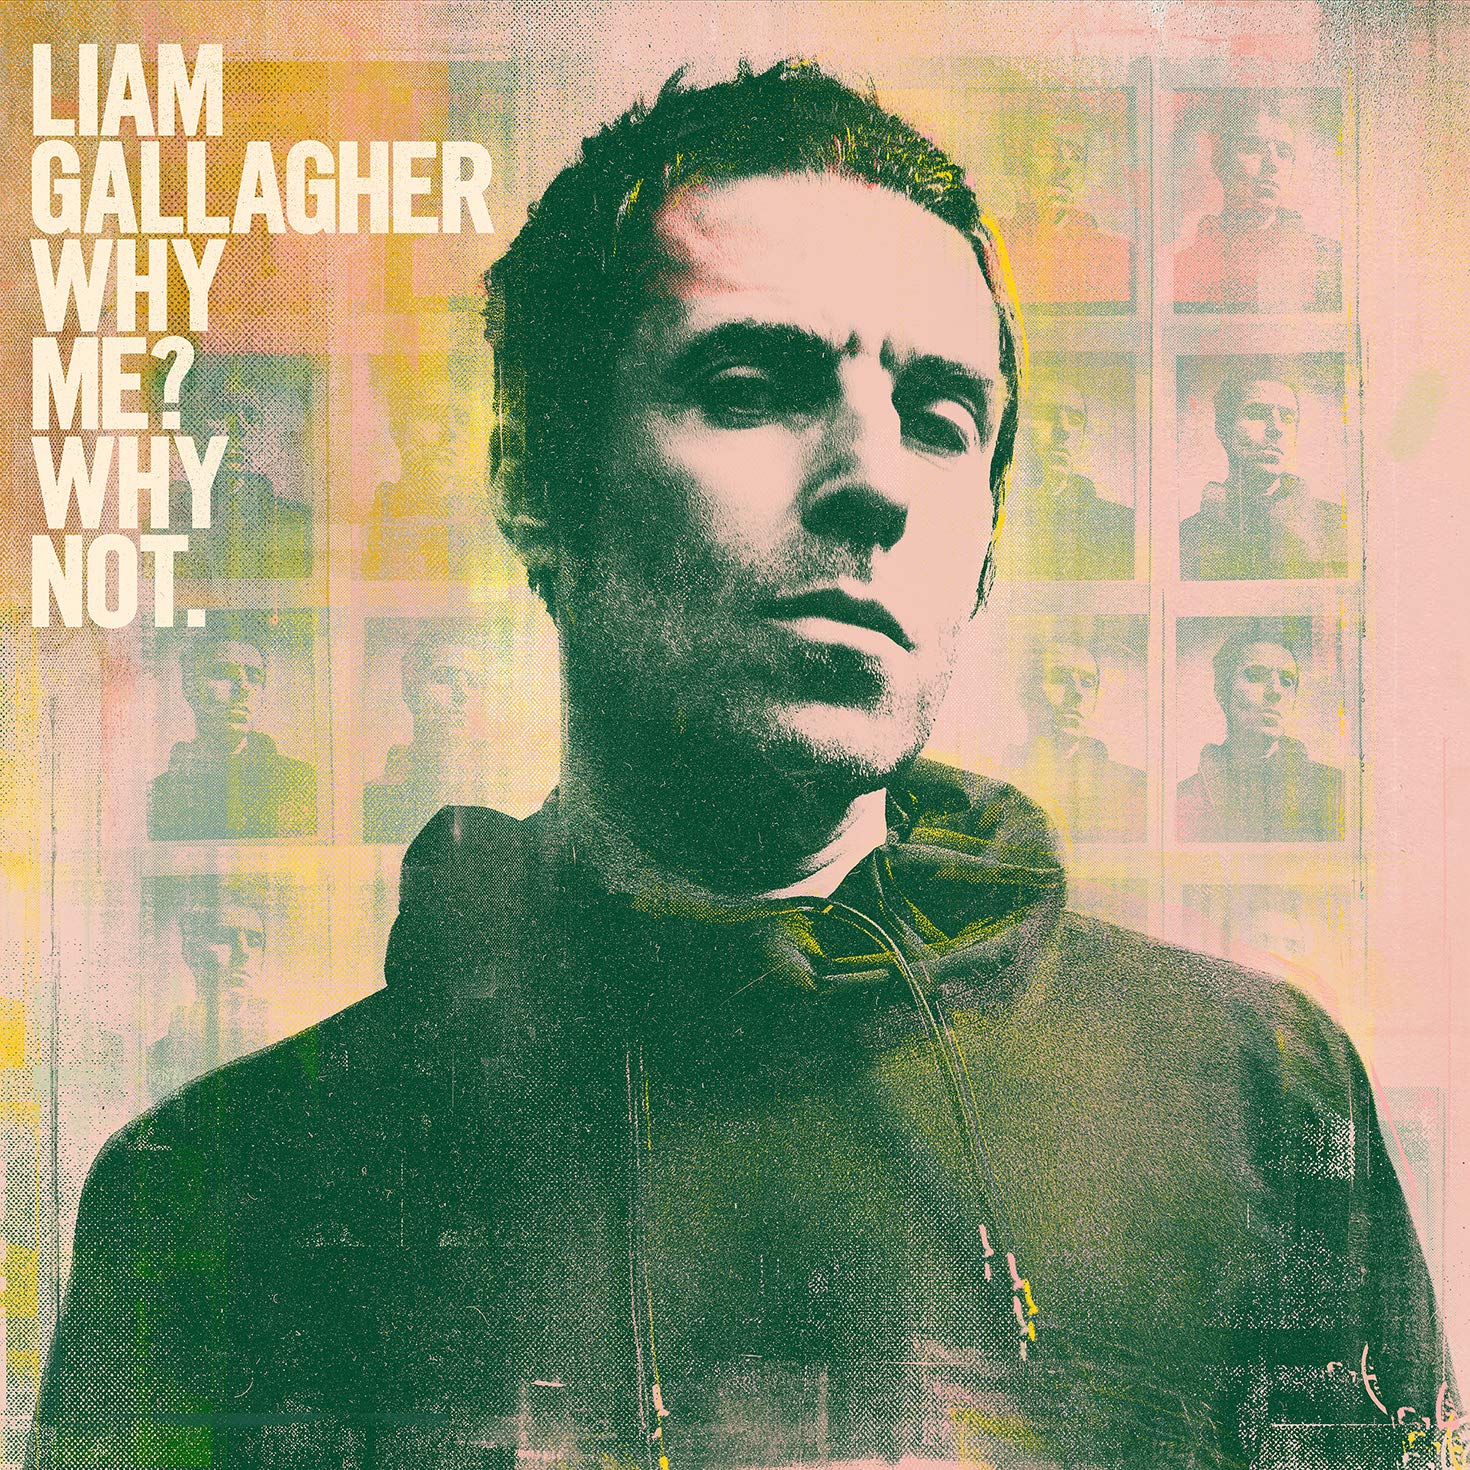 Liam Gallagher – Why Me? Why Not. (Deluxe Edition) (2019) [FLAC 24bit/44,1kHz]